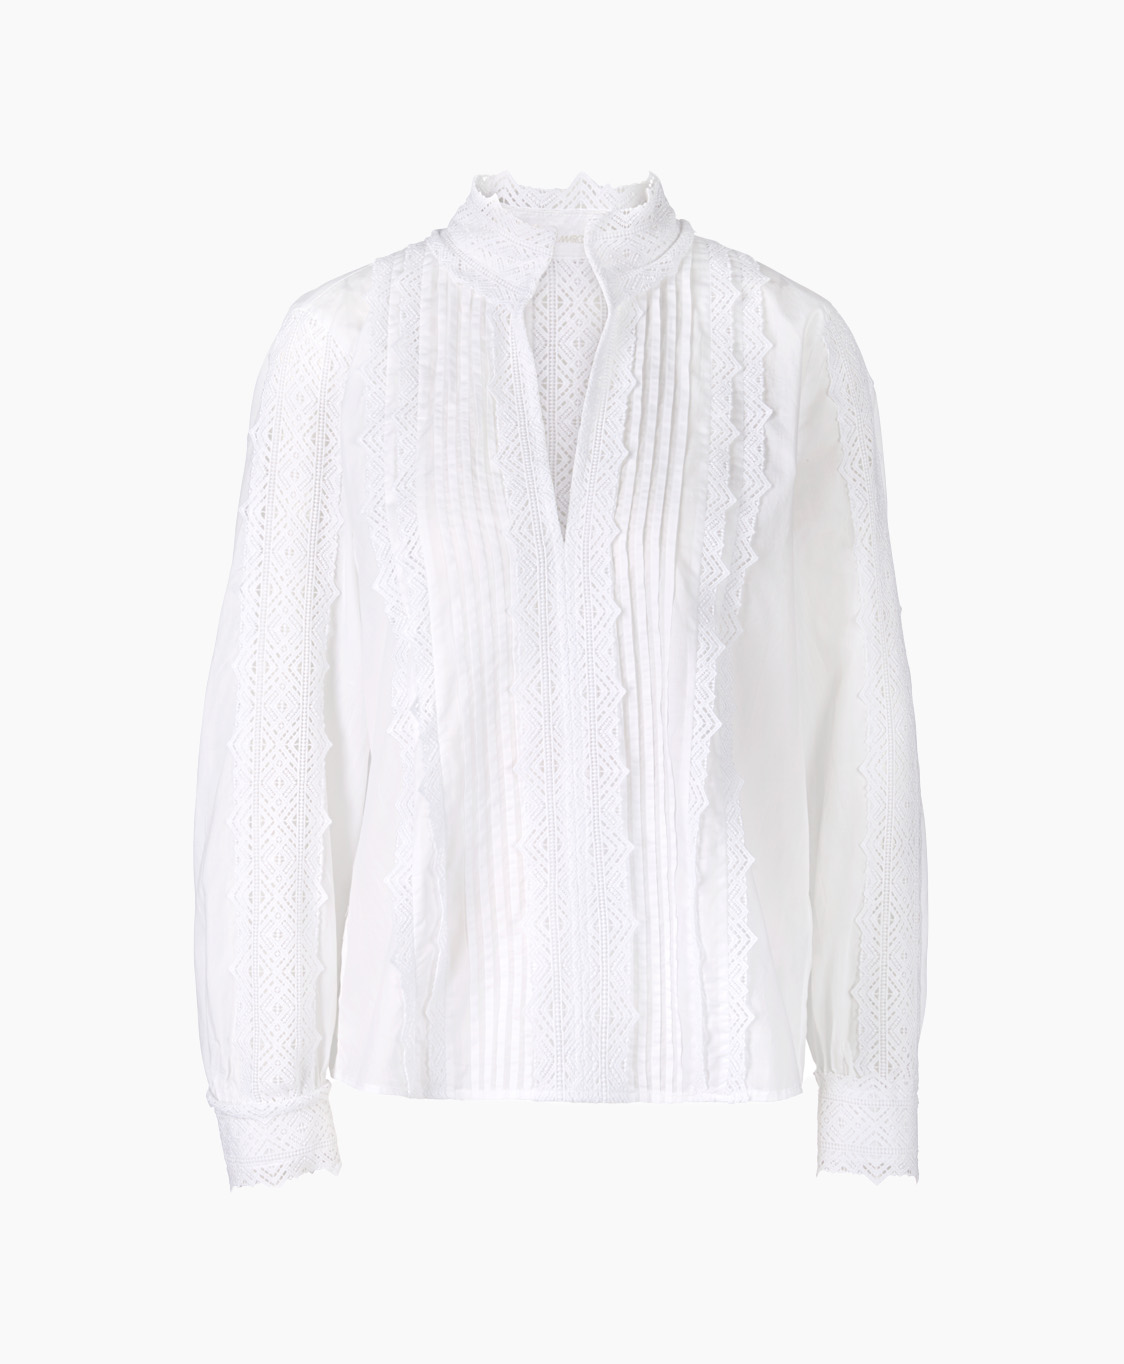 Marccain Collectie Blouse Uc 51.36 W94 Wit